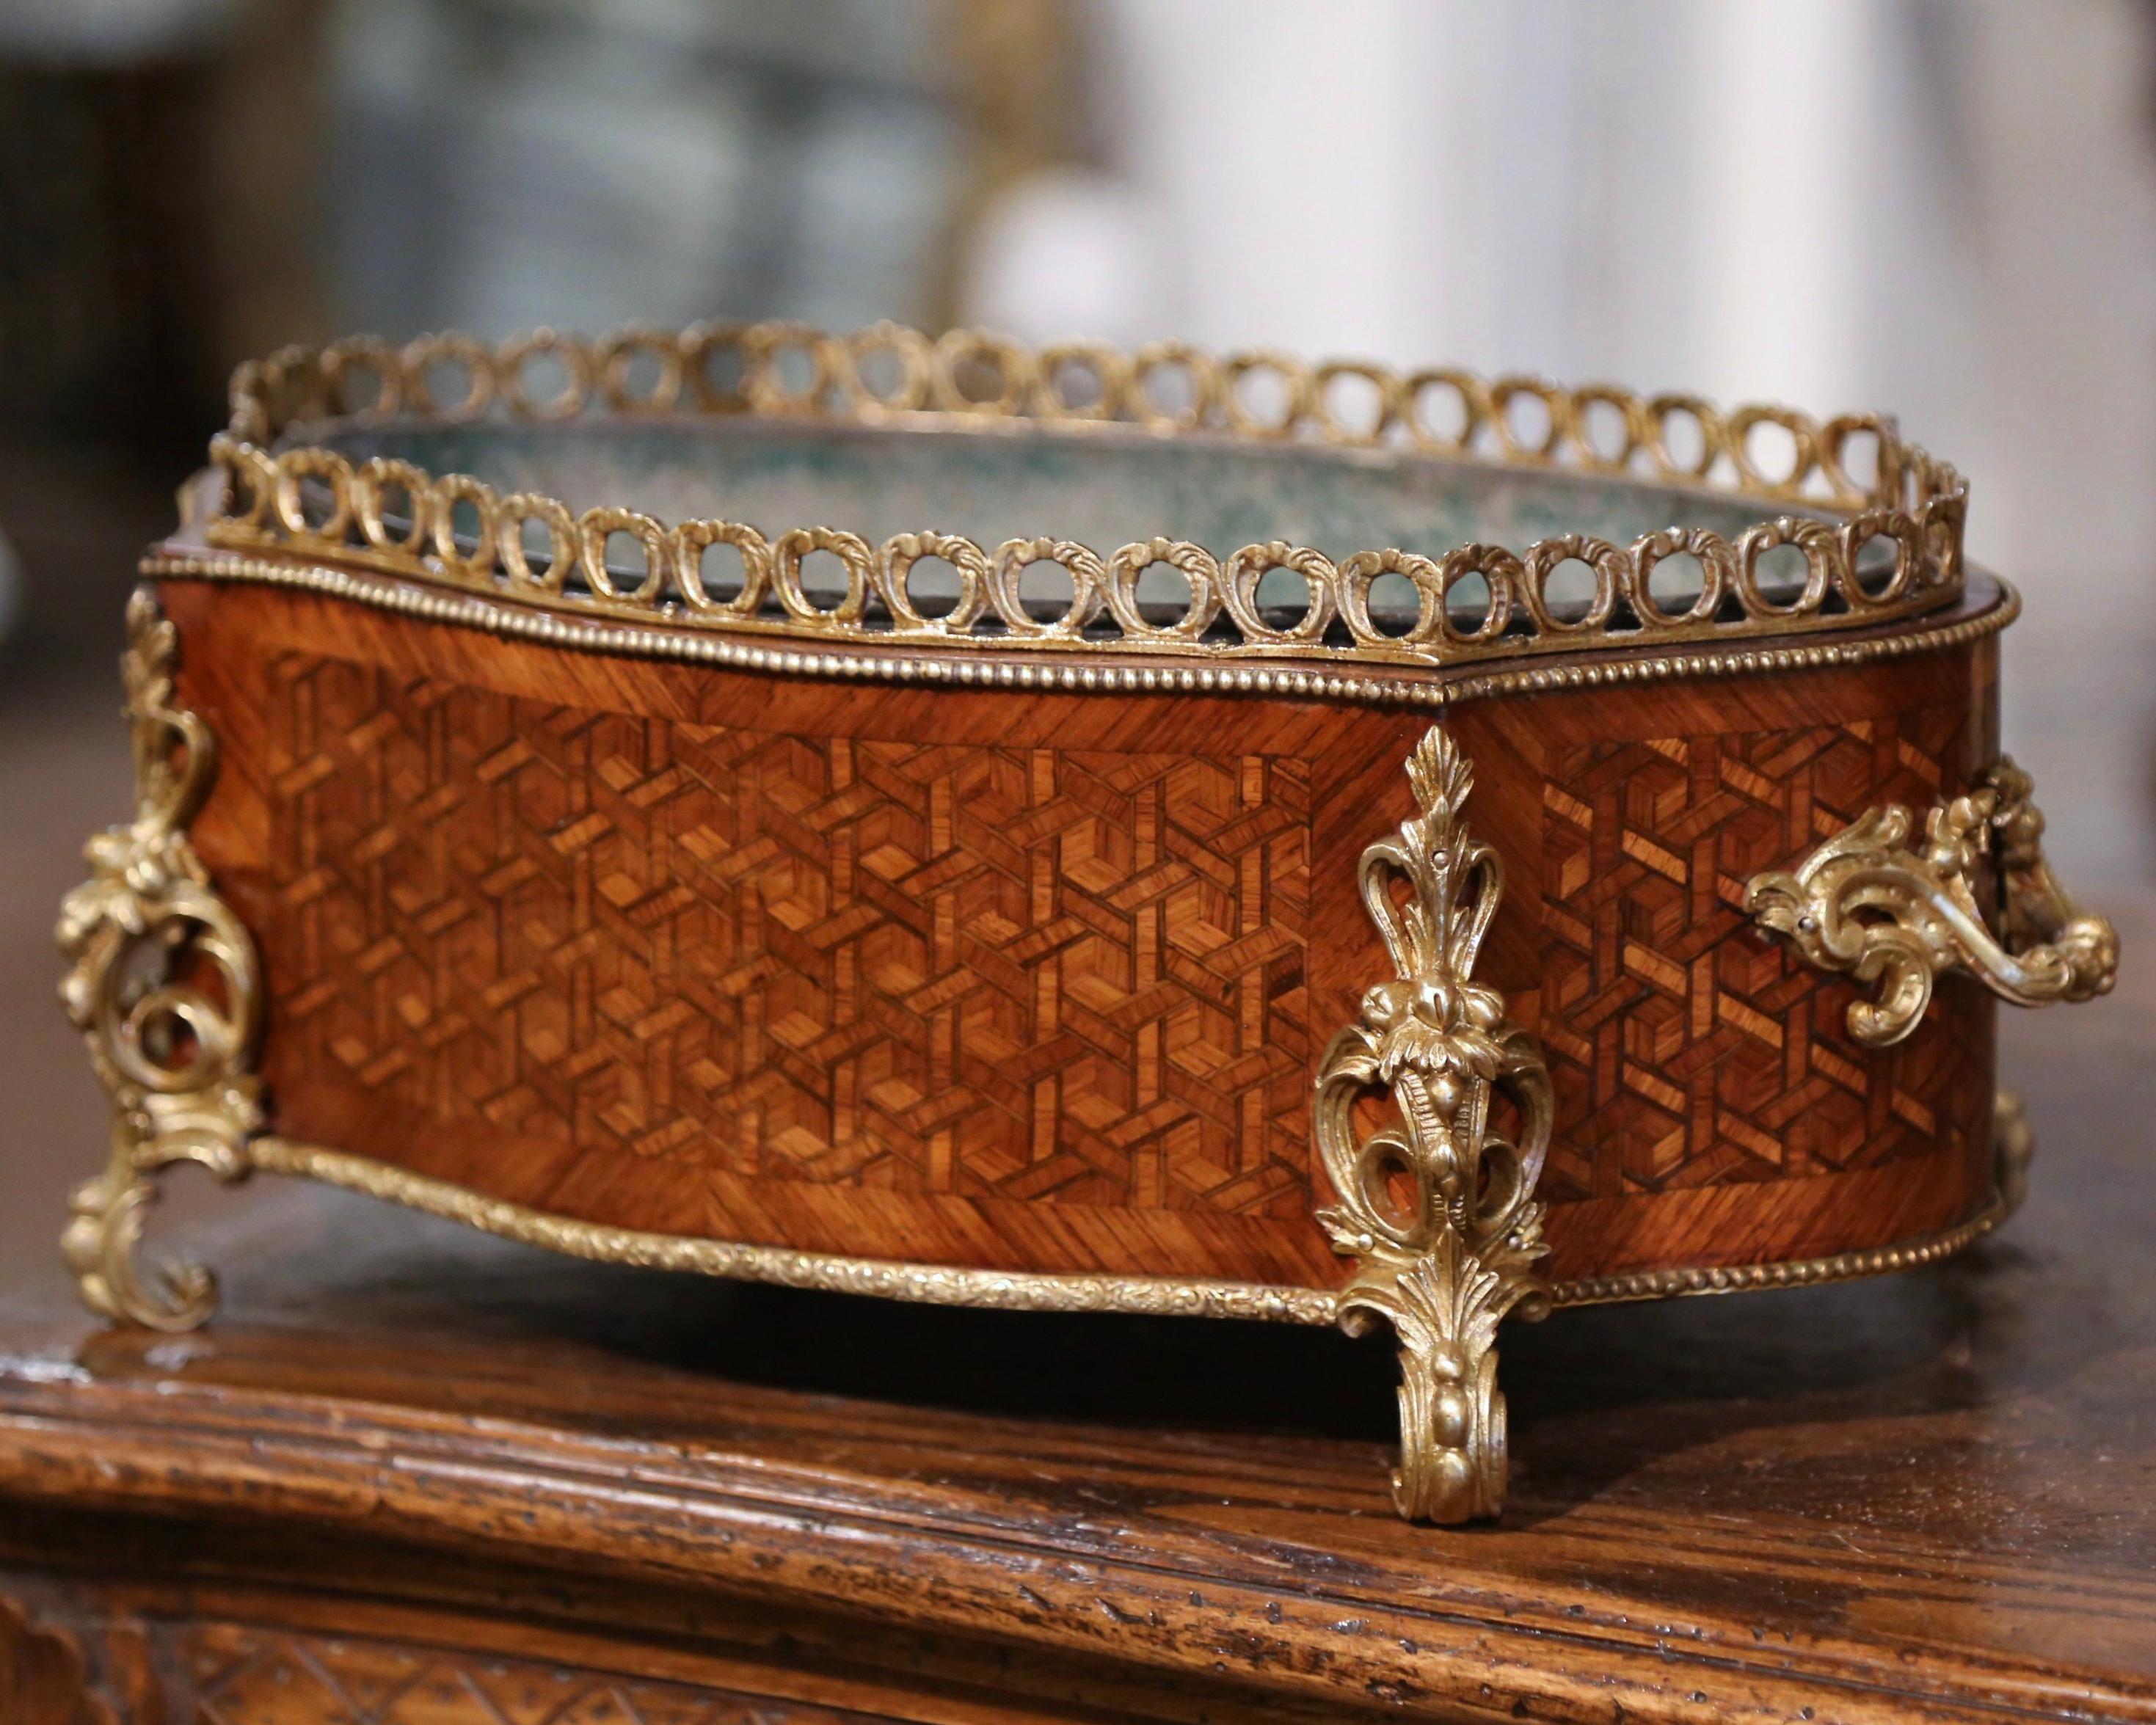 This elegant oval planter was crafted in Paris, France circa 1870. The antique walnut jardinière features a serpentine front and bombe sides dressed with intricate bronze handles; the planter is decorated with marquetry motifs on all sides. The top